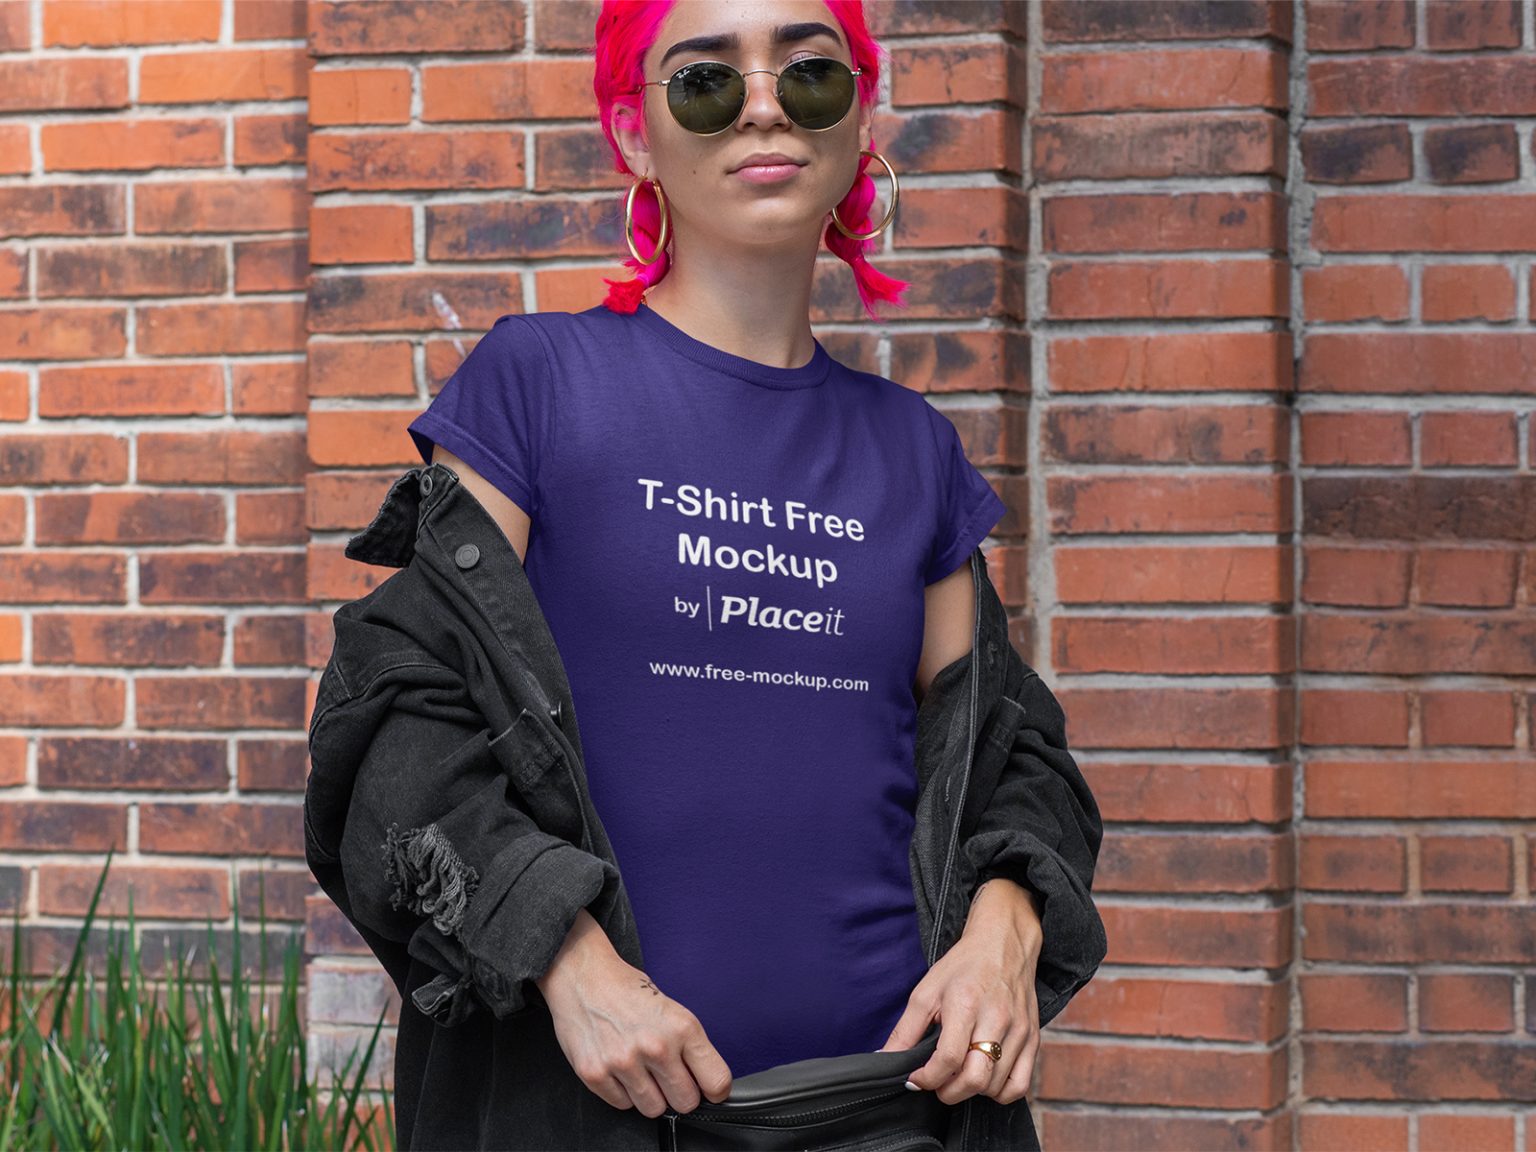 T-Shirt Online Free Mockup of a Woman with Pink Hair | Free Mockup